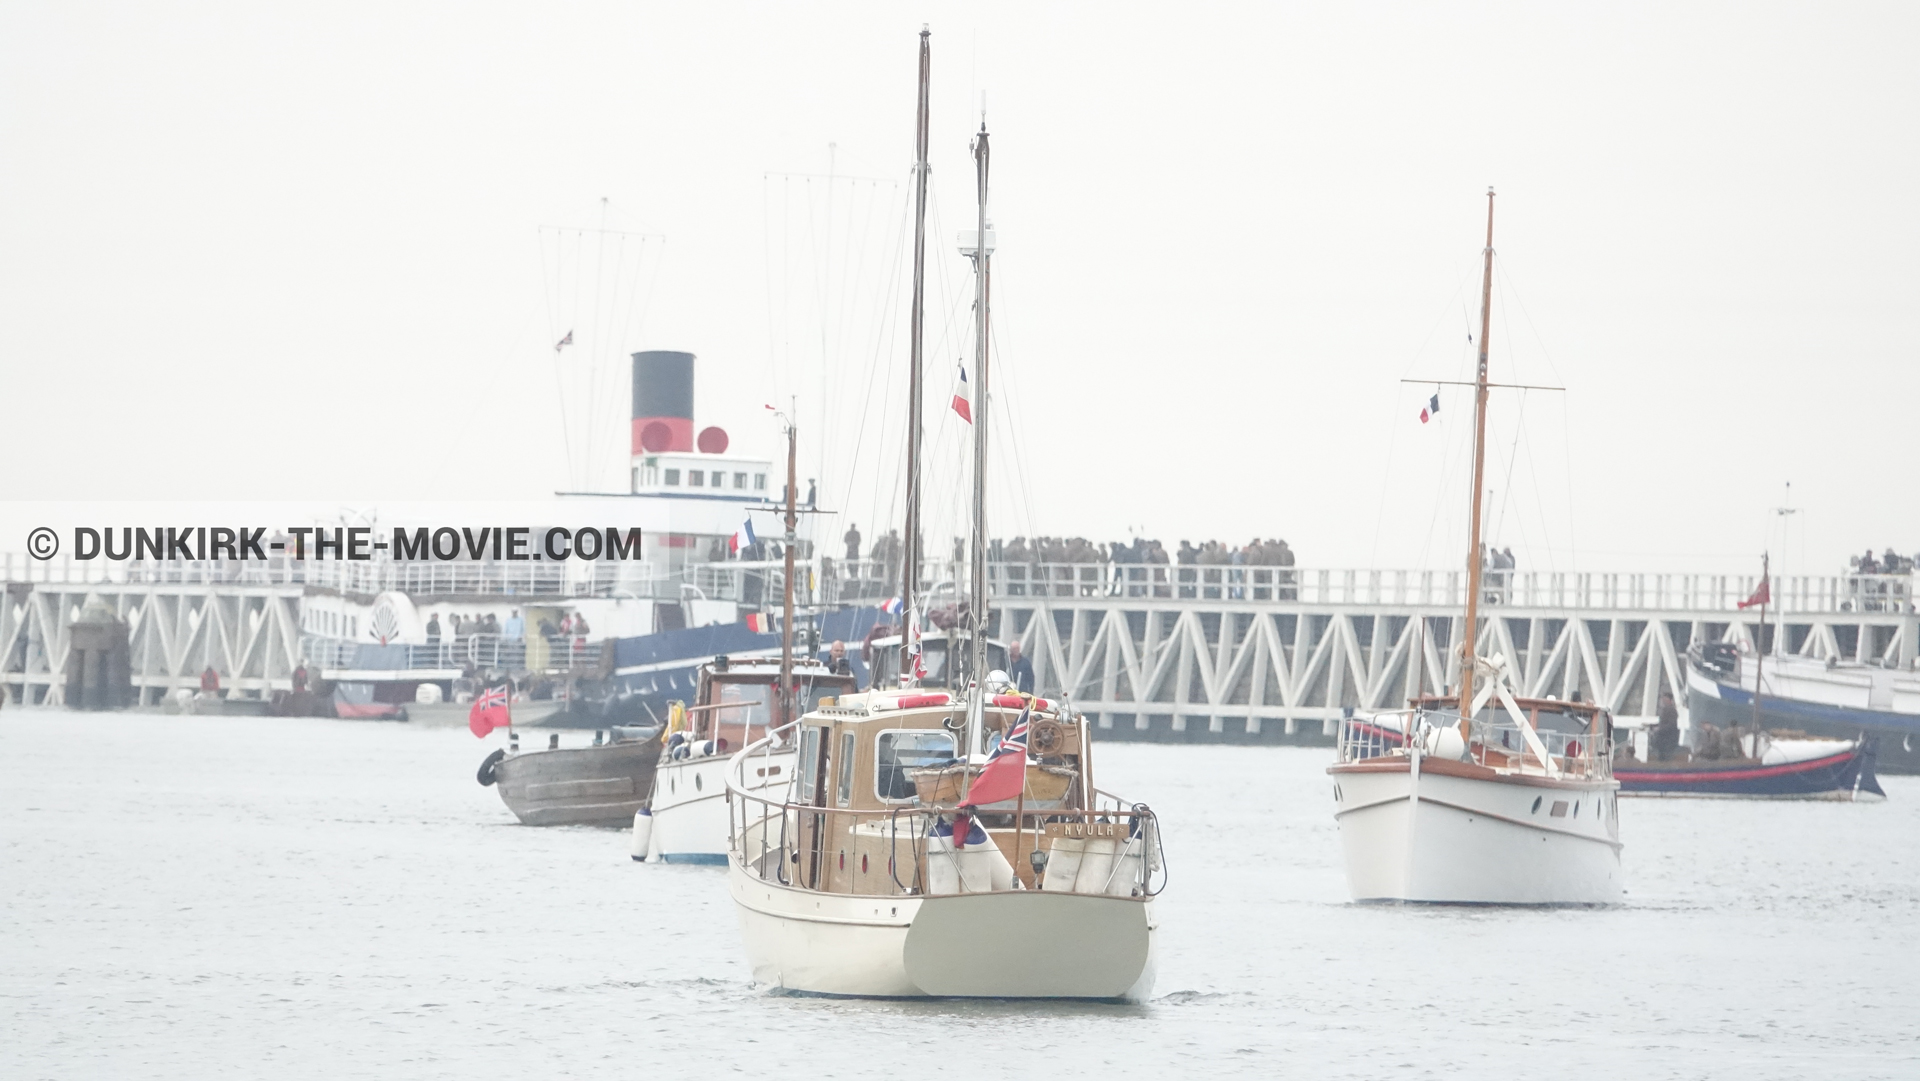 Picture with boat, EST pier, Princess Elizabeth,  from behind the scene of the Dunkirk movie by Nolan